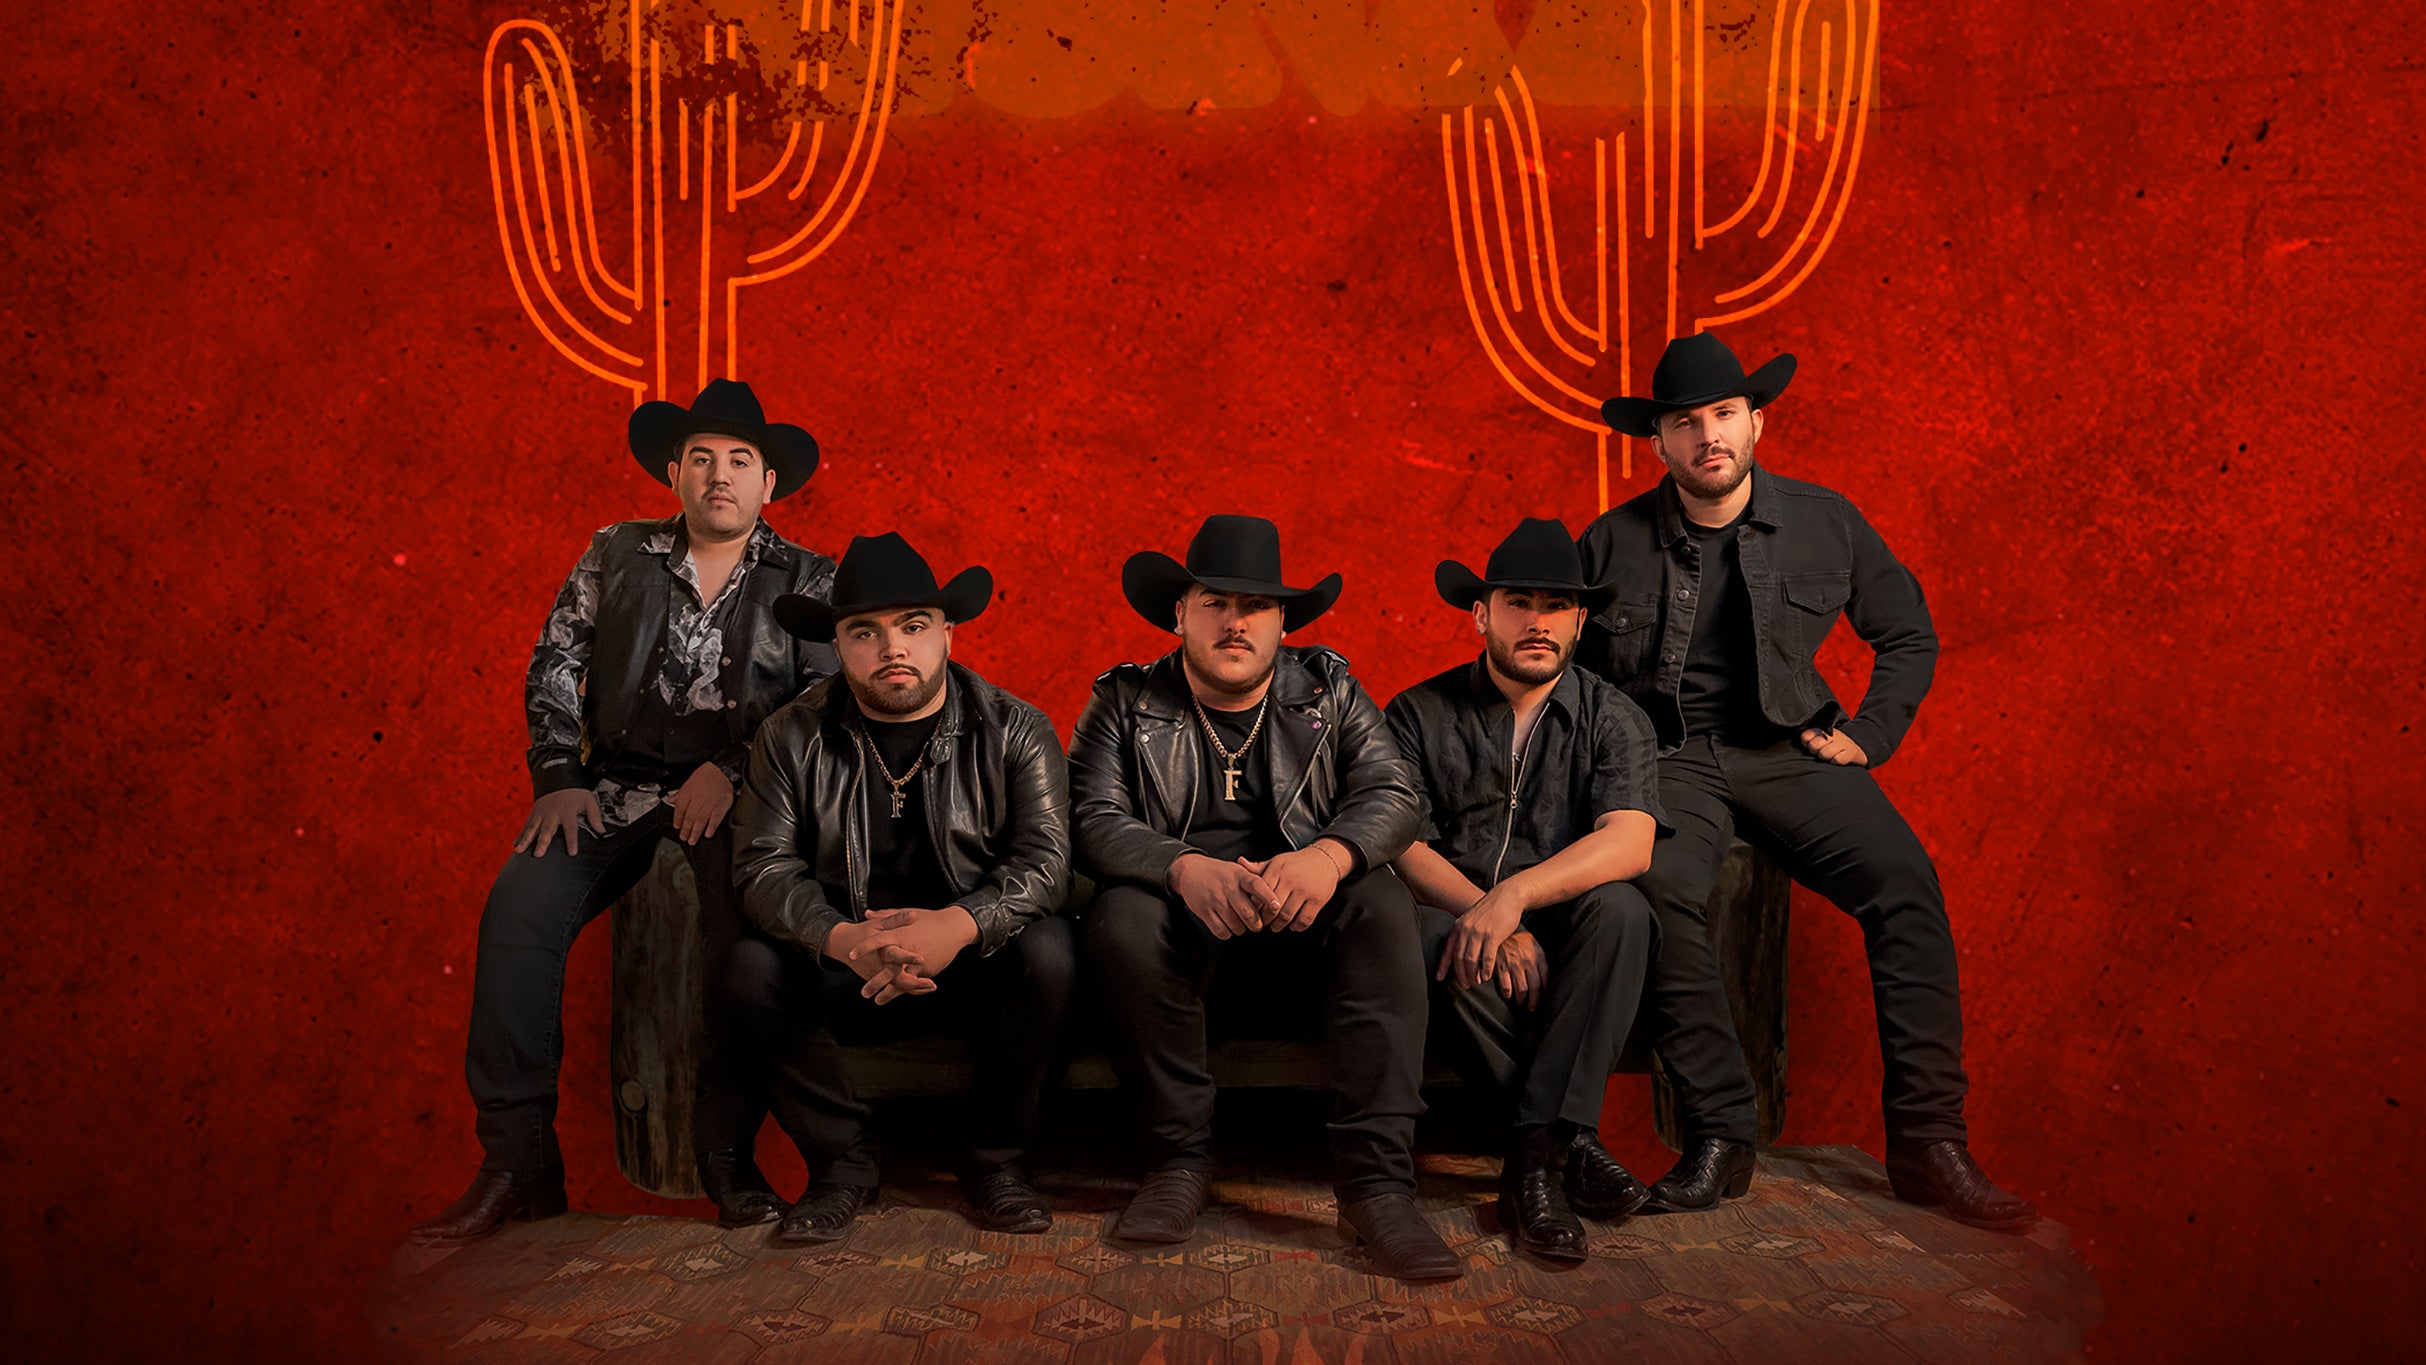 Grupo Frontera & Luis R. Conriquez free presale code for early tickets in San Jose